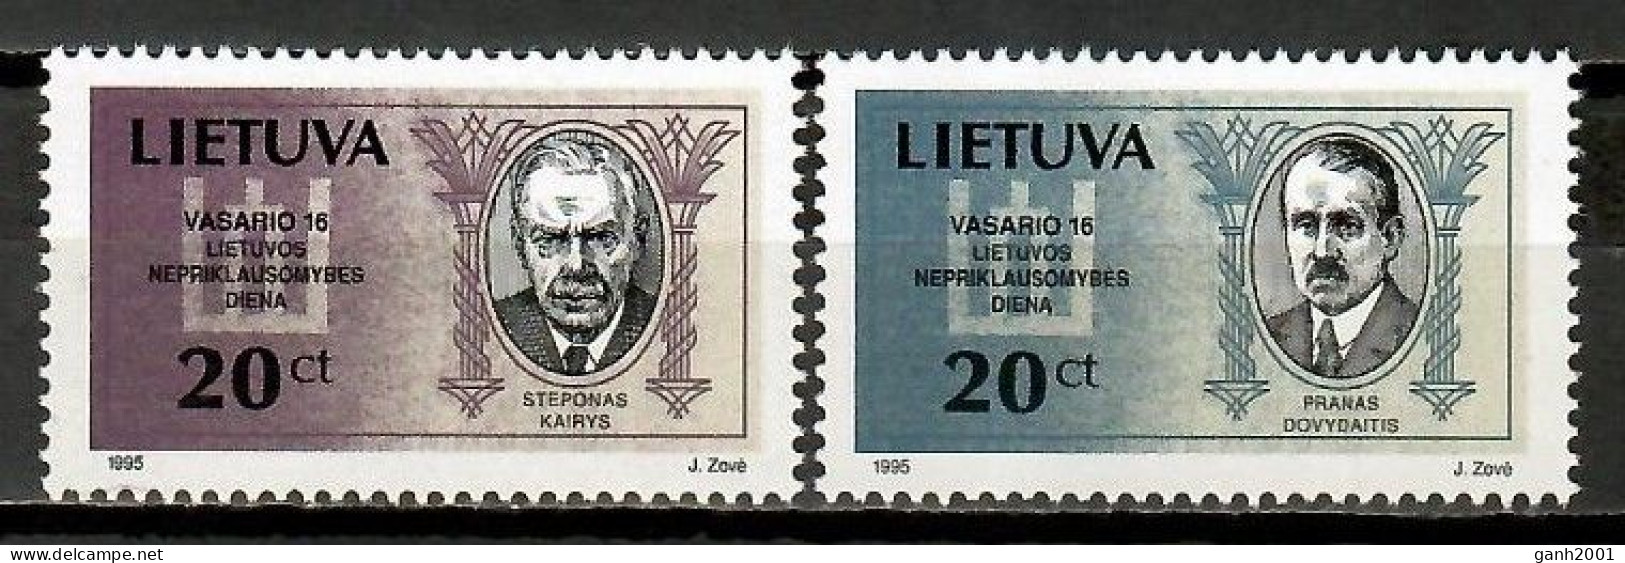 Lithuania 1995 Lituania / Independence Day Famous People Celebrities MNH Personajes Celebridades / Kd04  36-5 - Lithuania